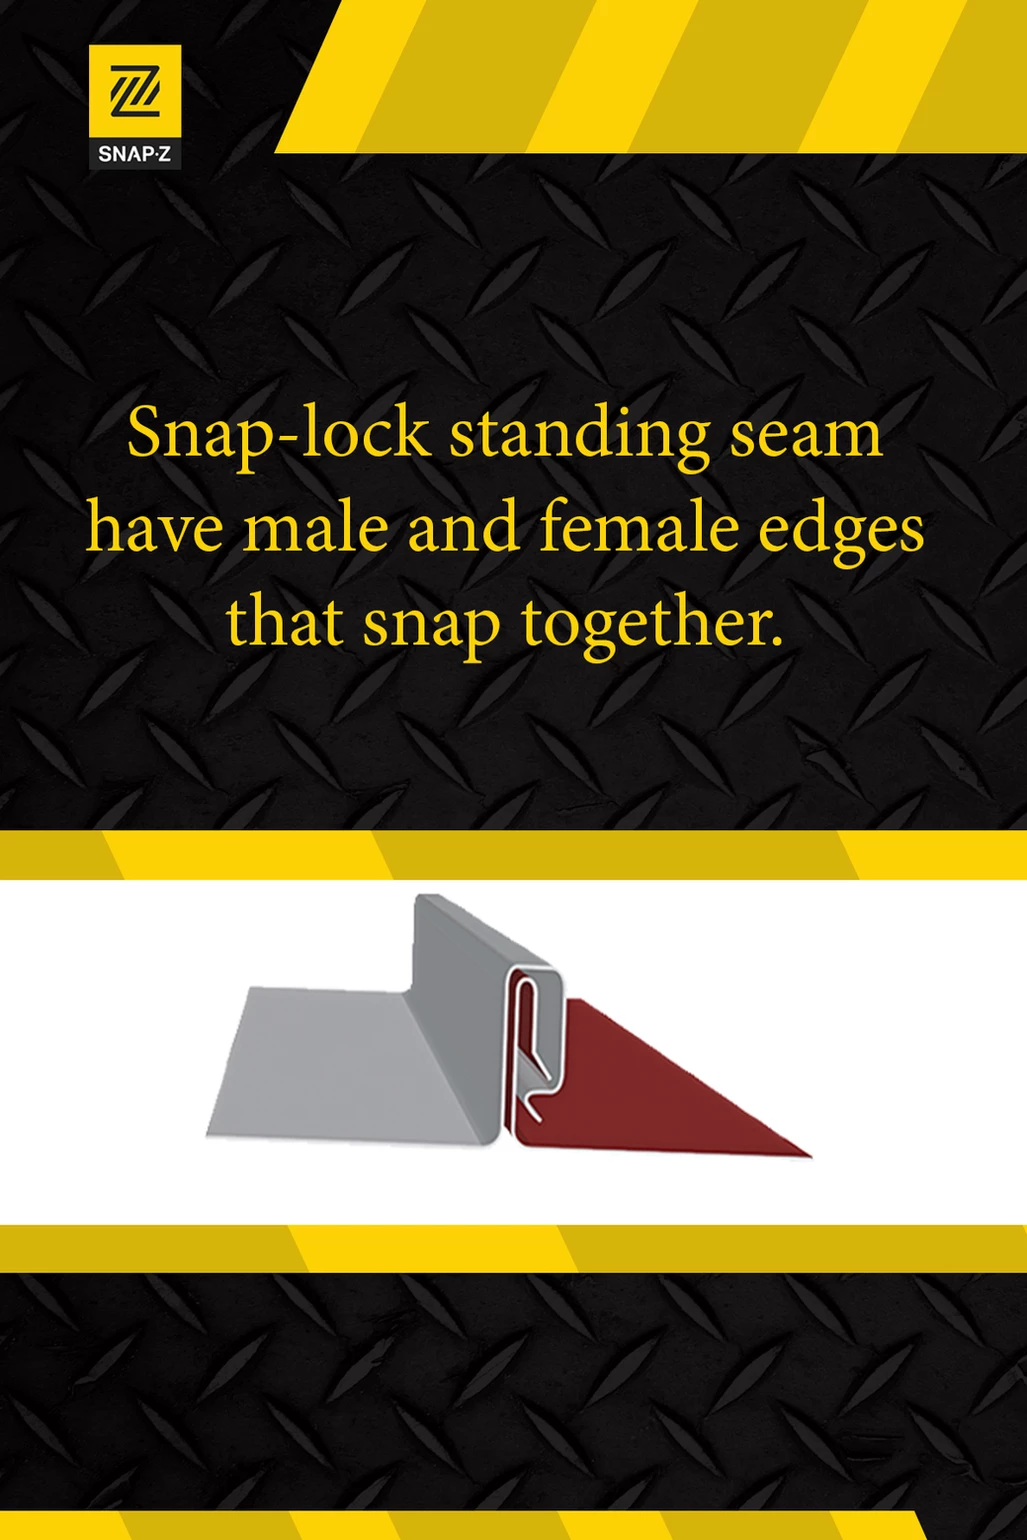 snap lock standing seam have male and female edges that snap together